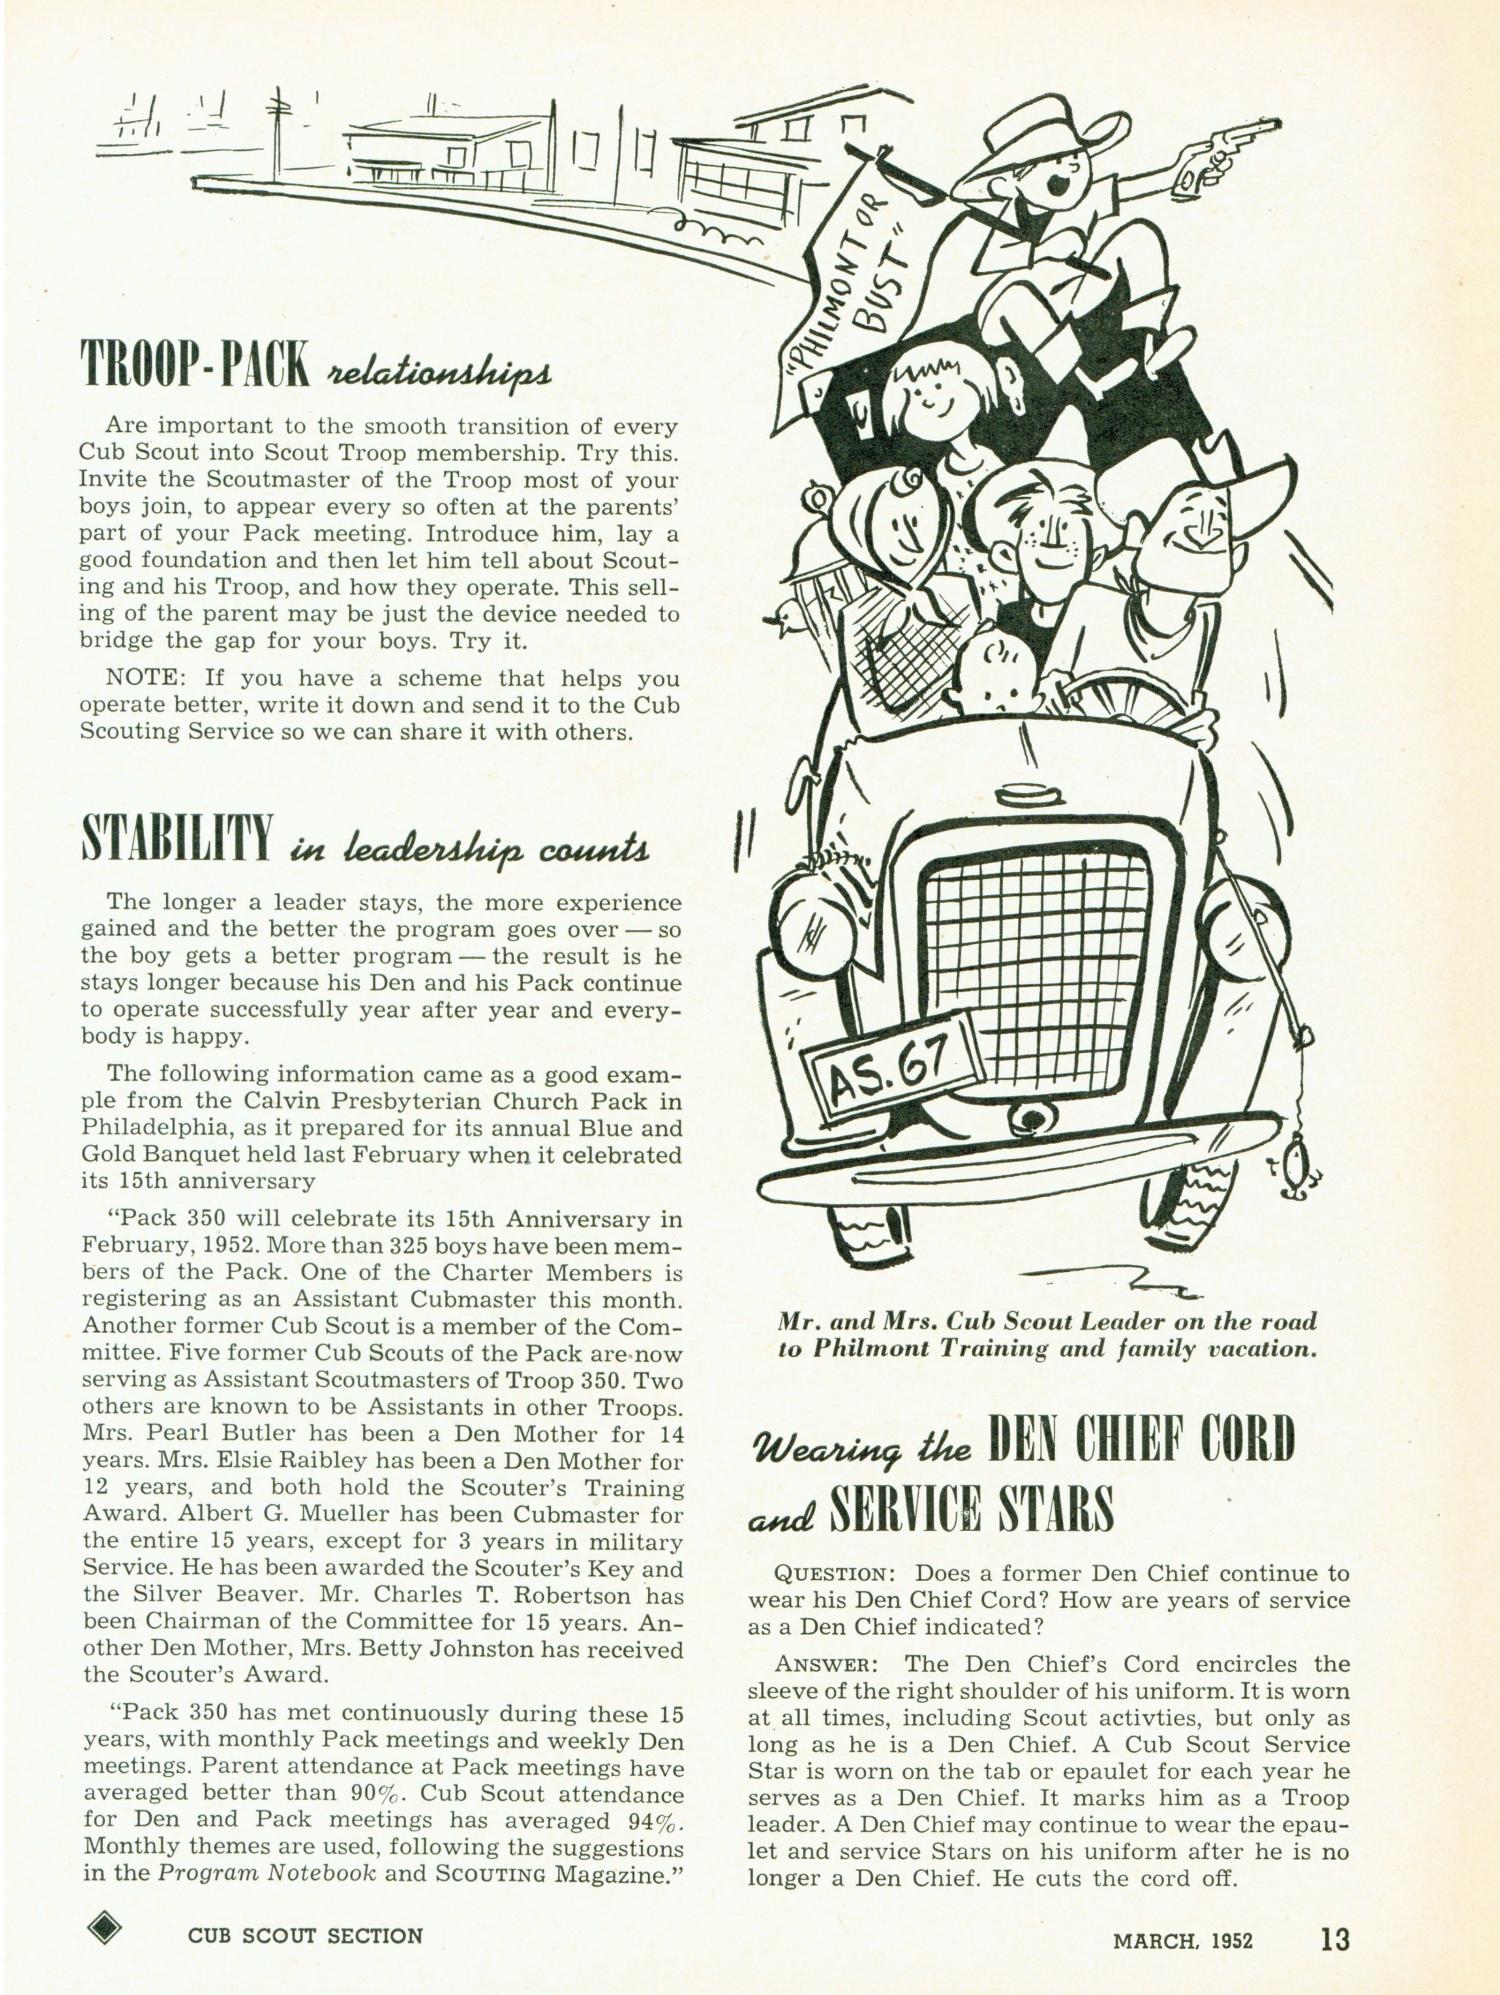 Scouting, Volume 40, Number 3, March 1952
                                                
                                                    13
                                                